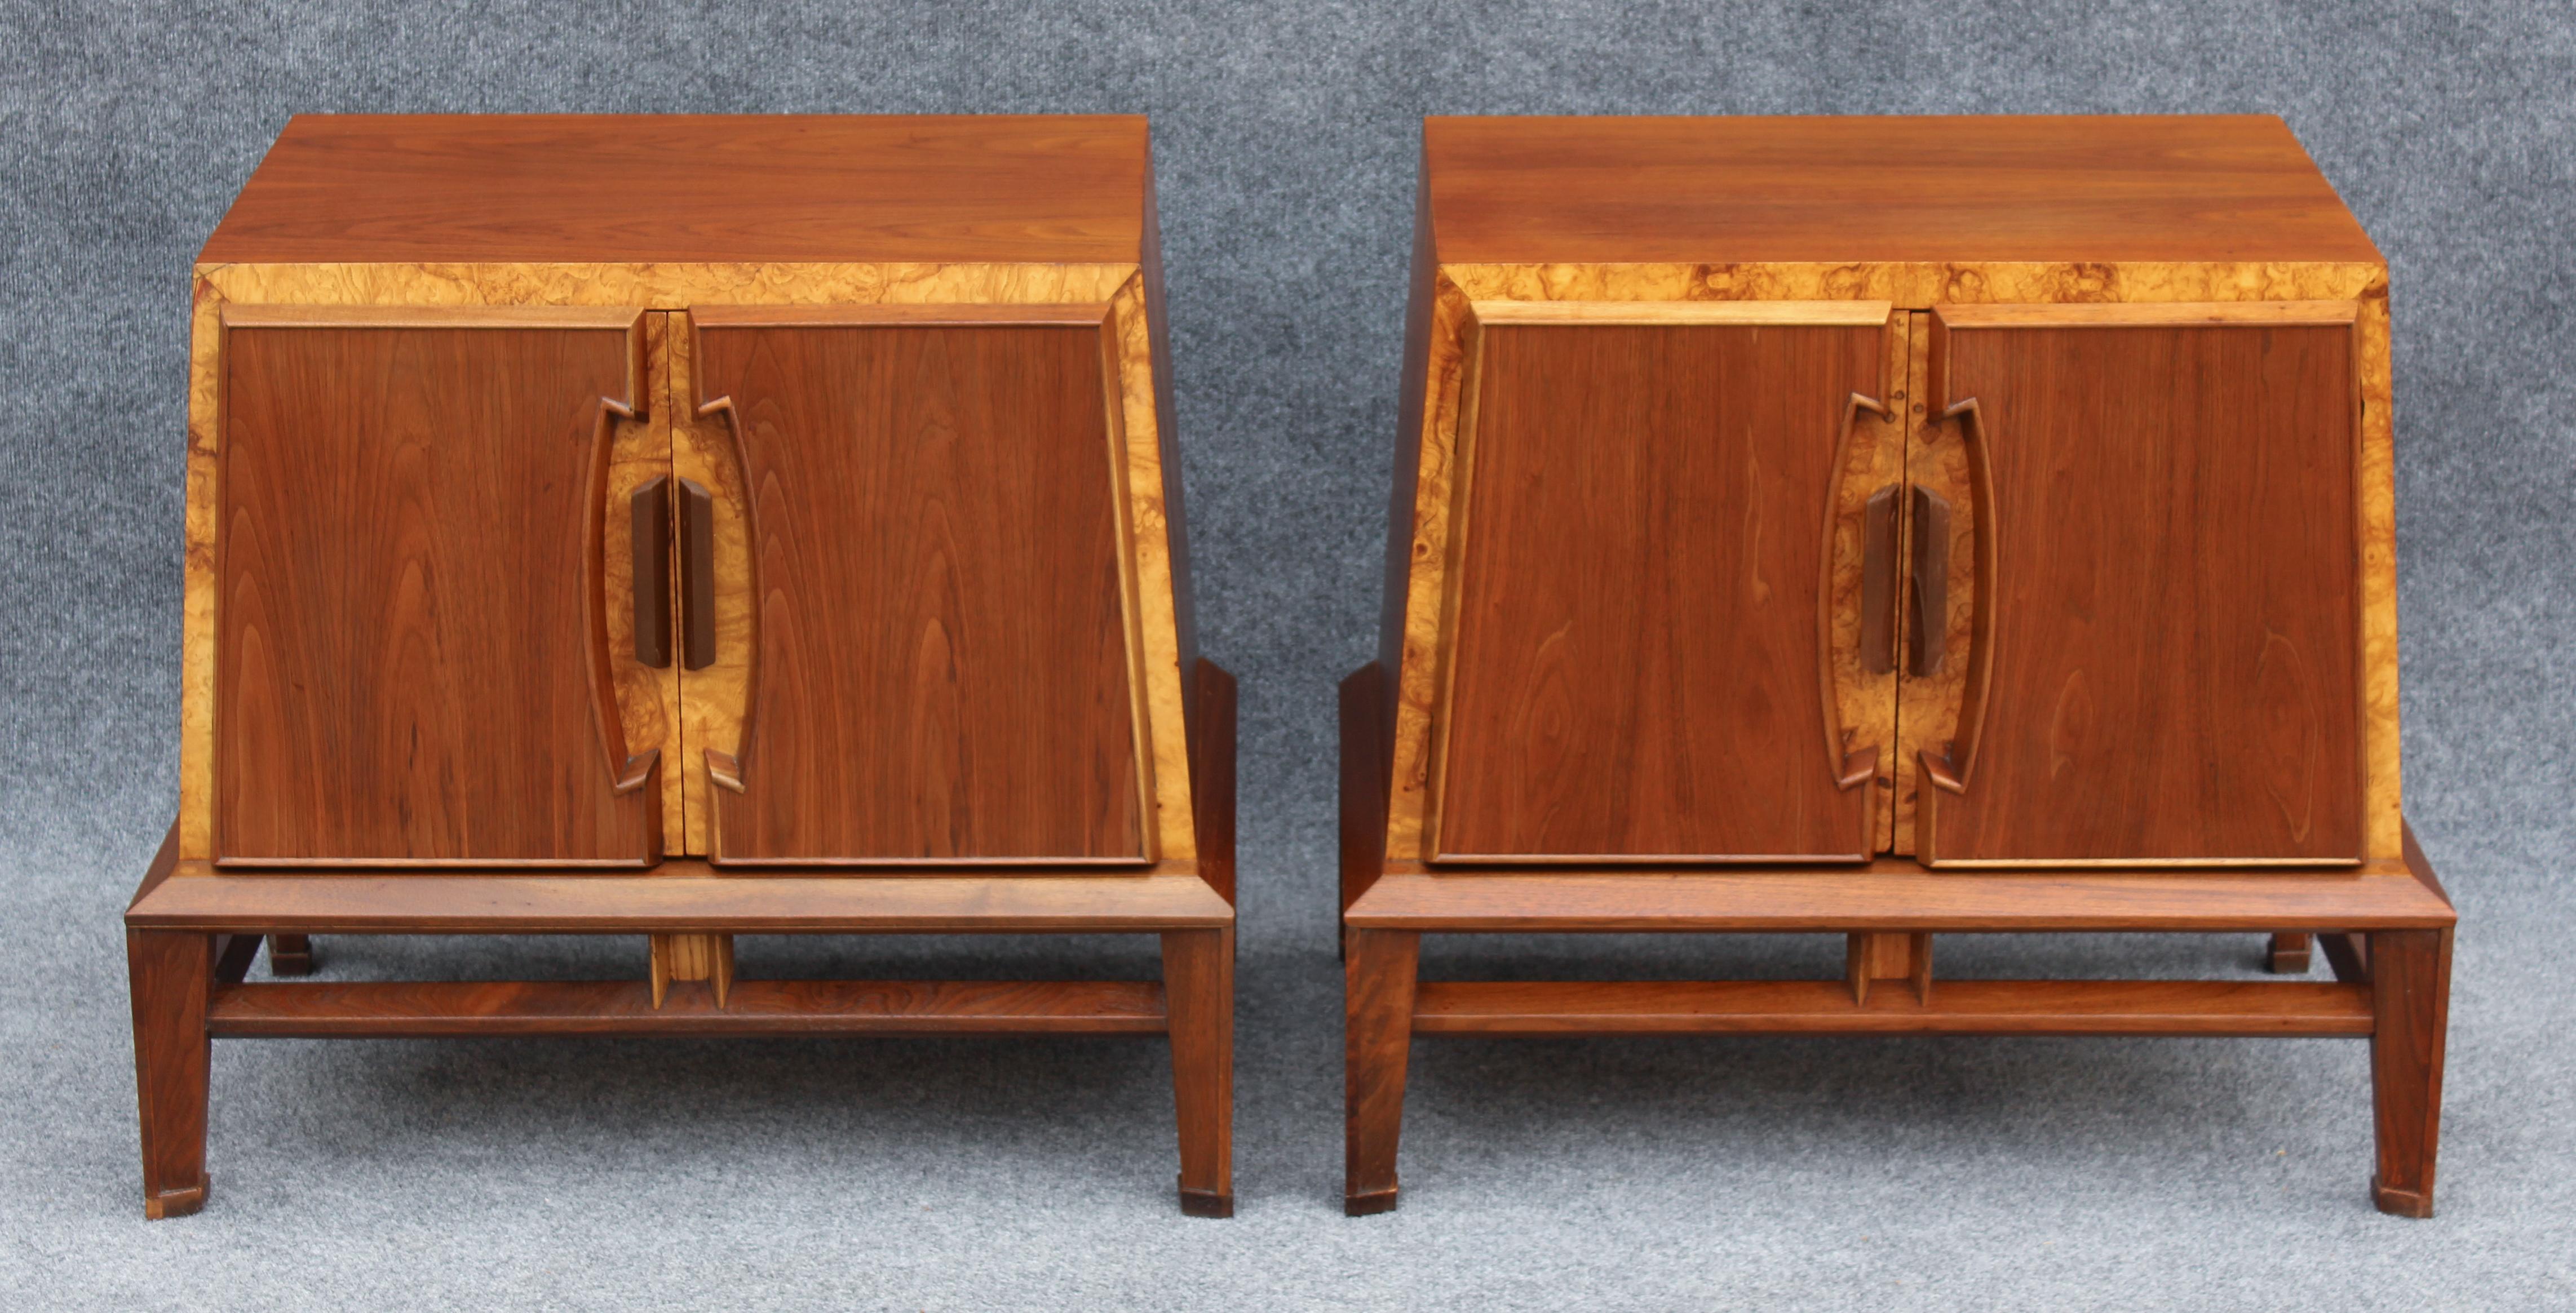 This rare and super sculptural pair of nightstands was designed in the 1970s by Helen Hobey for Baker. They feature a walnut and burlwood construction that is warm and pleasant to the eye. Sides that slope inward to meet the top, and an articulated